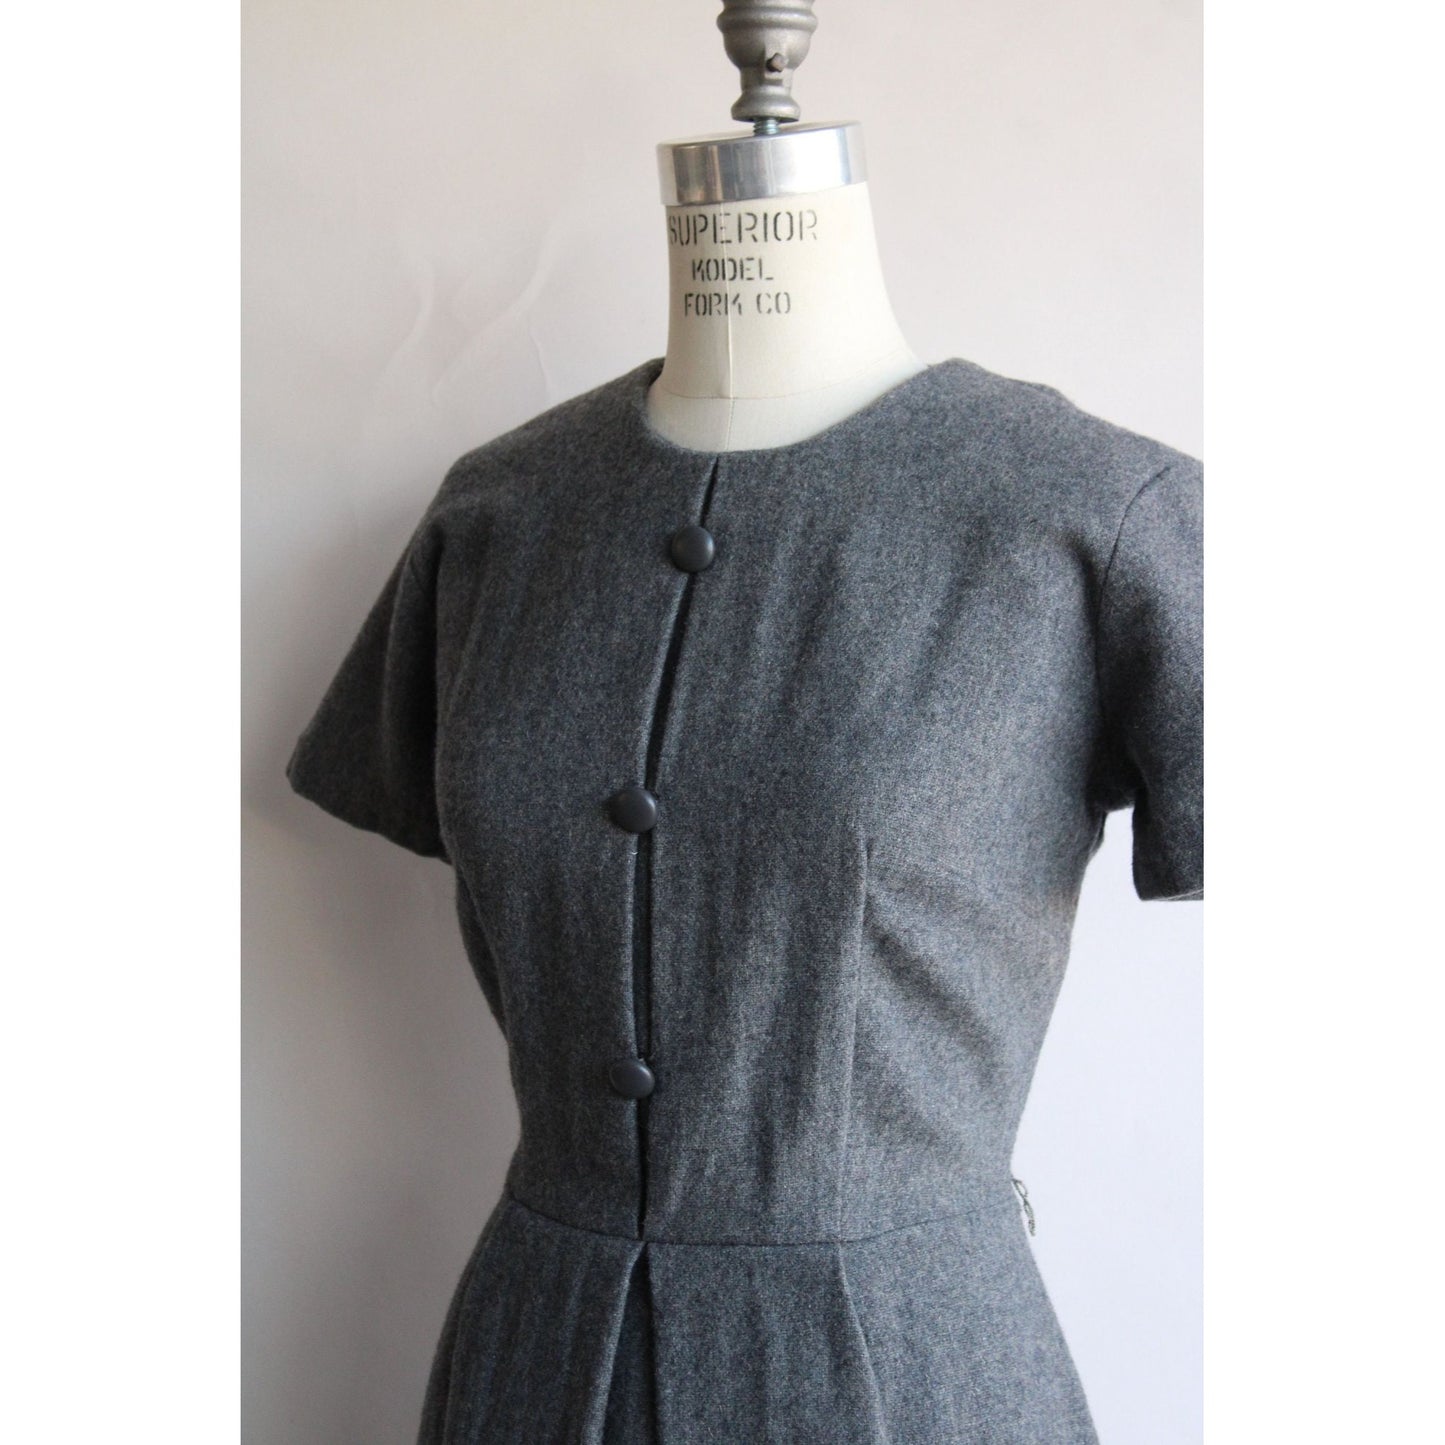 Vintage 1960s Gray Wool Fit and Flare Dress